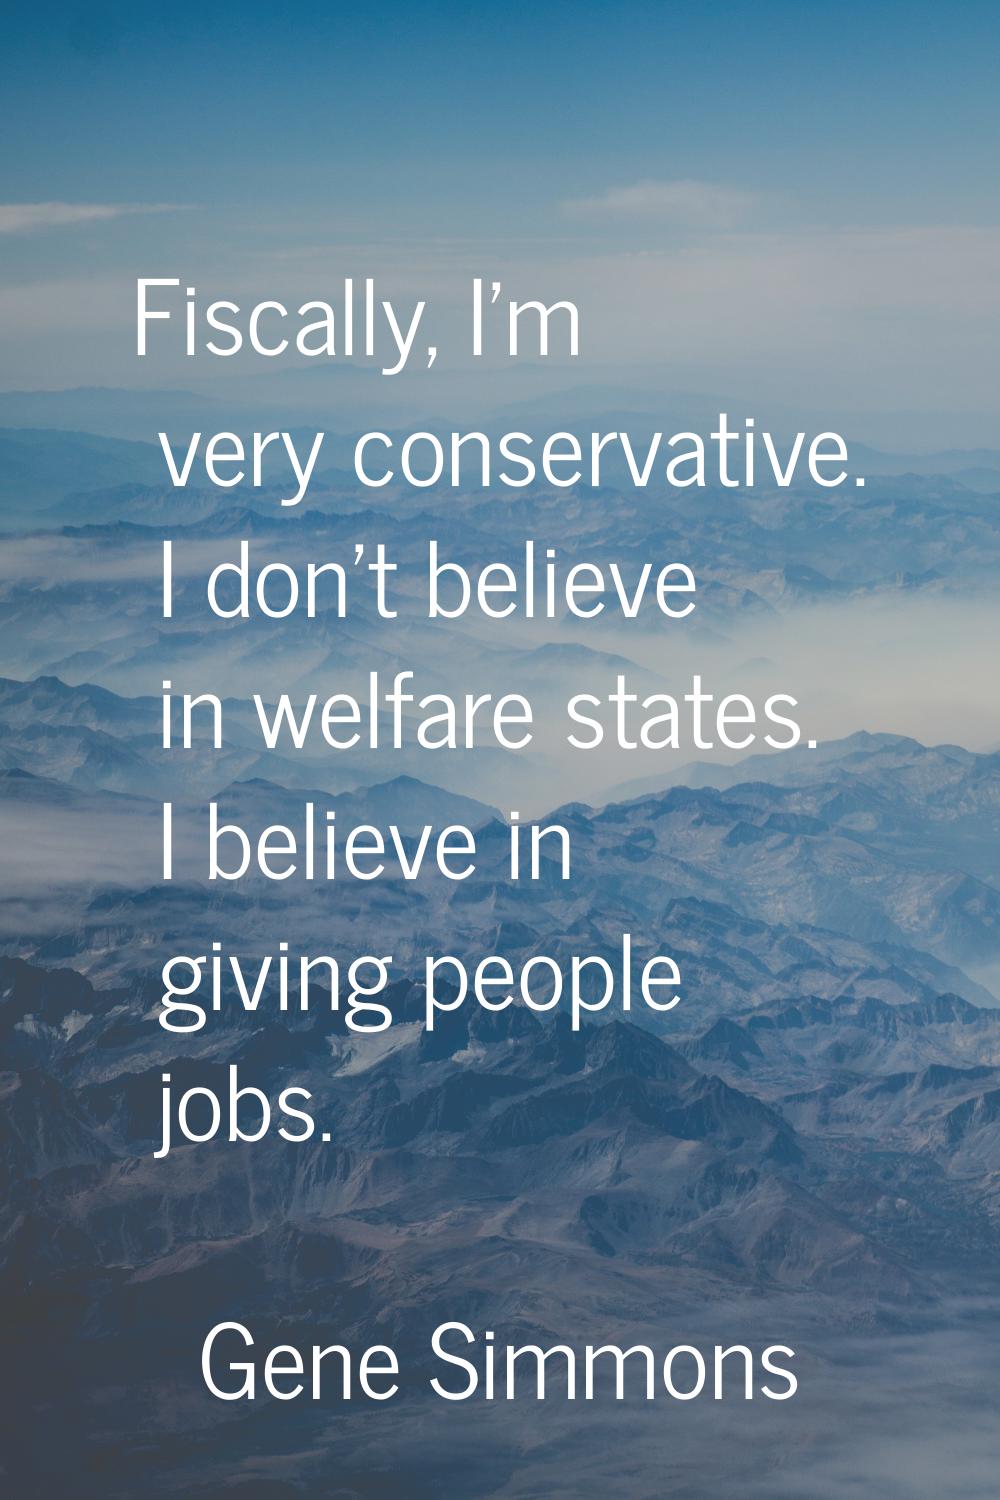 Fiscally, I'm very conservative. I don't believe in welfare states. I believe in giving people jobs